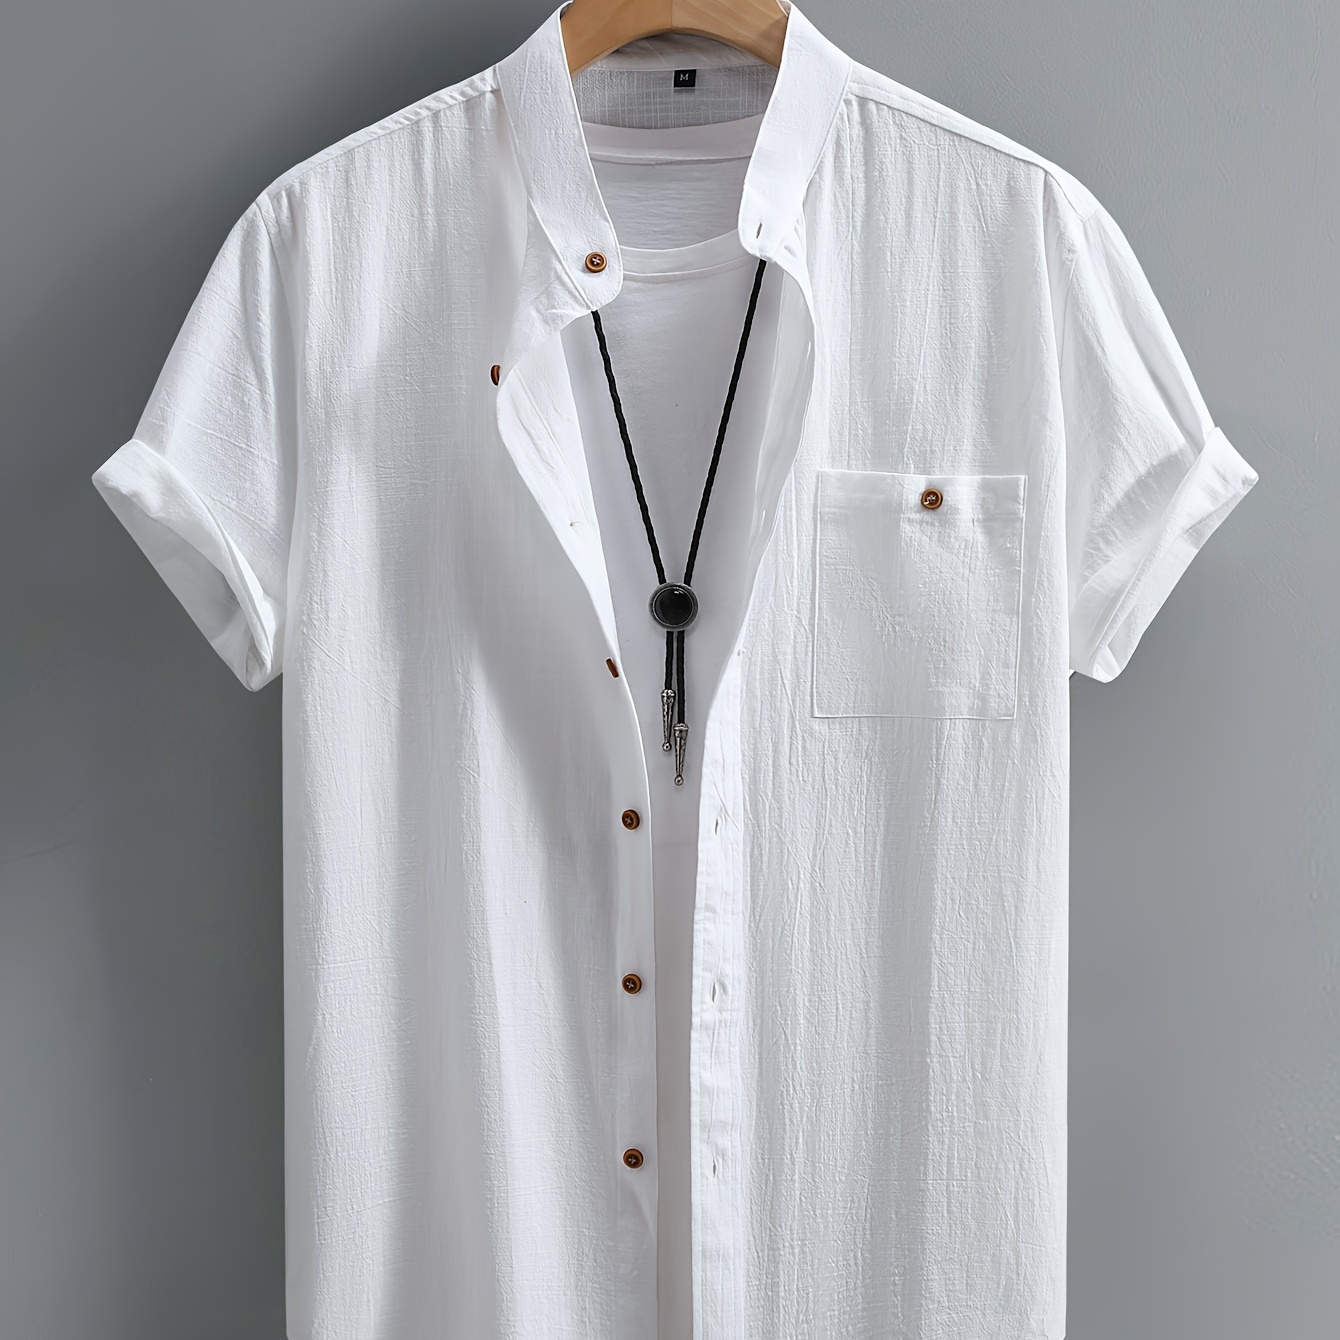 

Men's Solid Collar Short Sleeve Shirts, Male Casual Button Up Shirt With Chest Pocket For Summer Daily Wear And Vacation Resorts